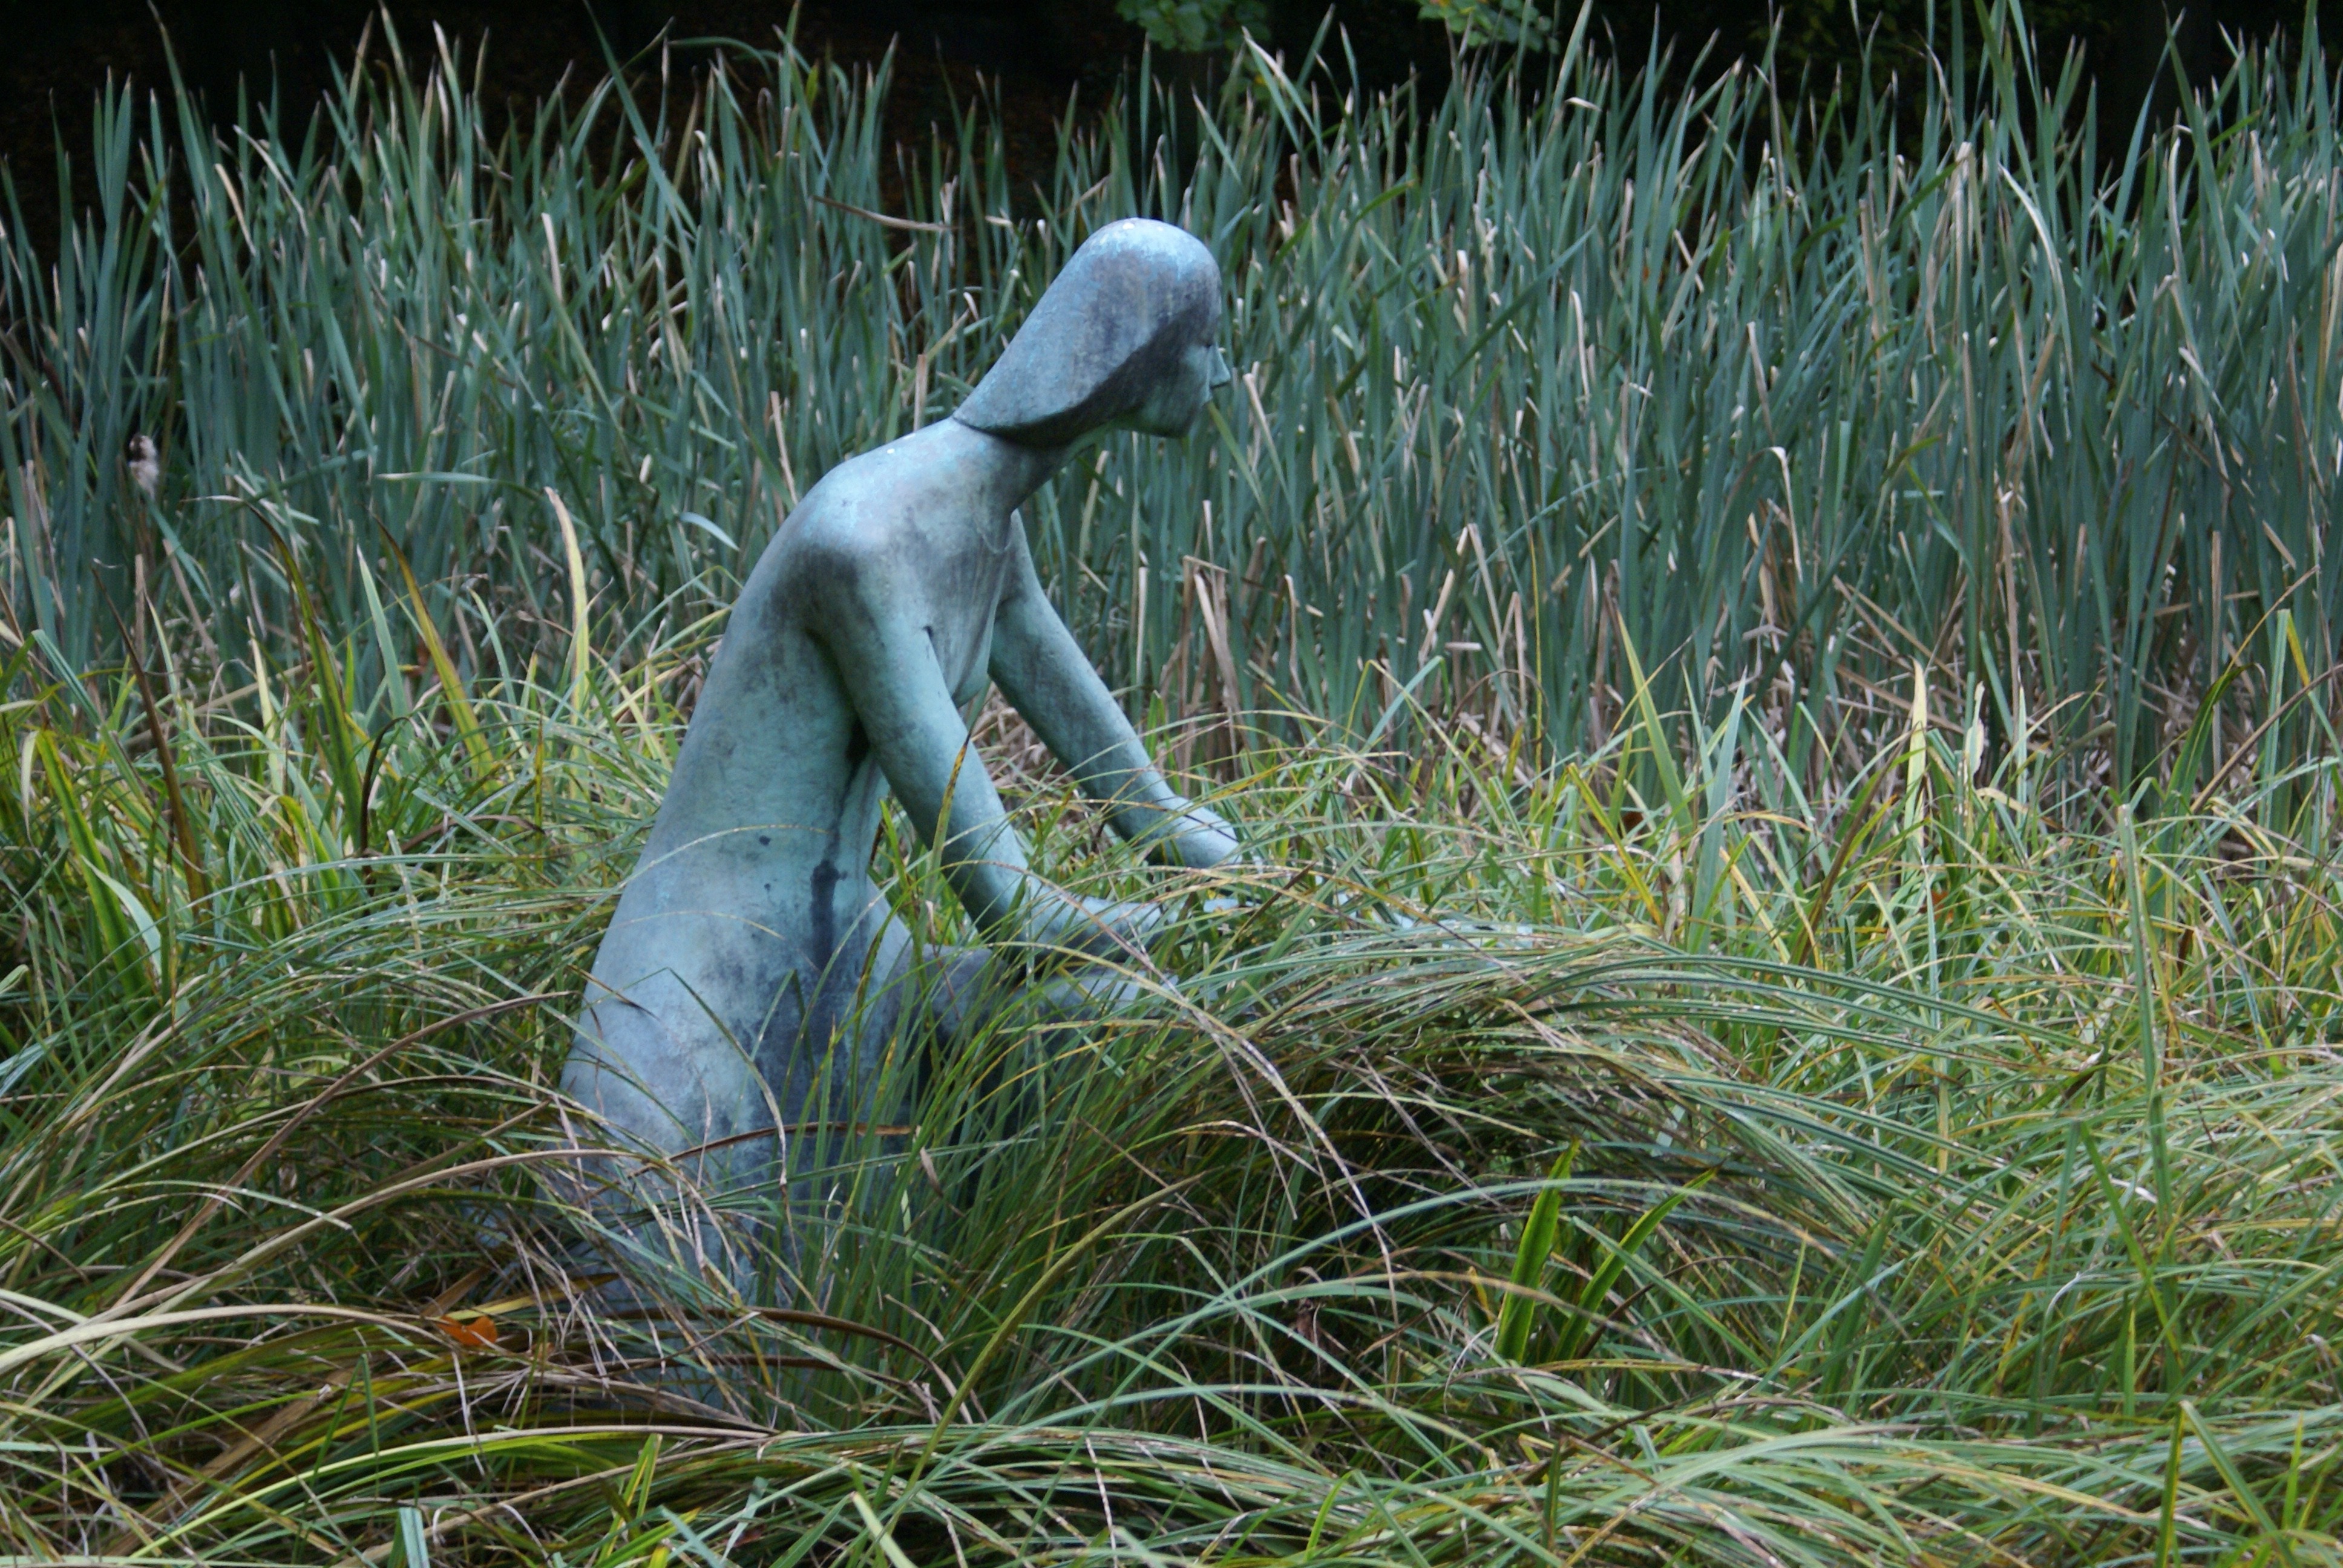 grey woman statue on green grass field during daytime